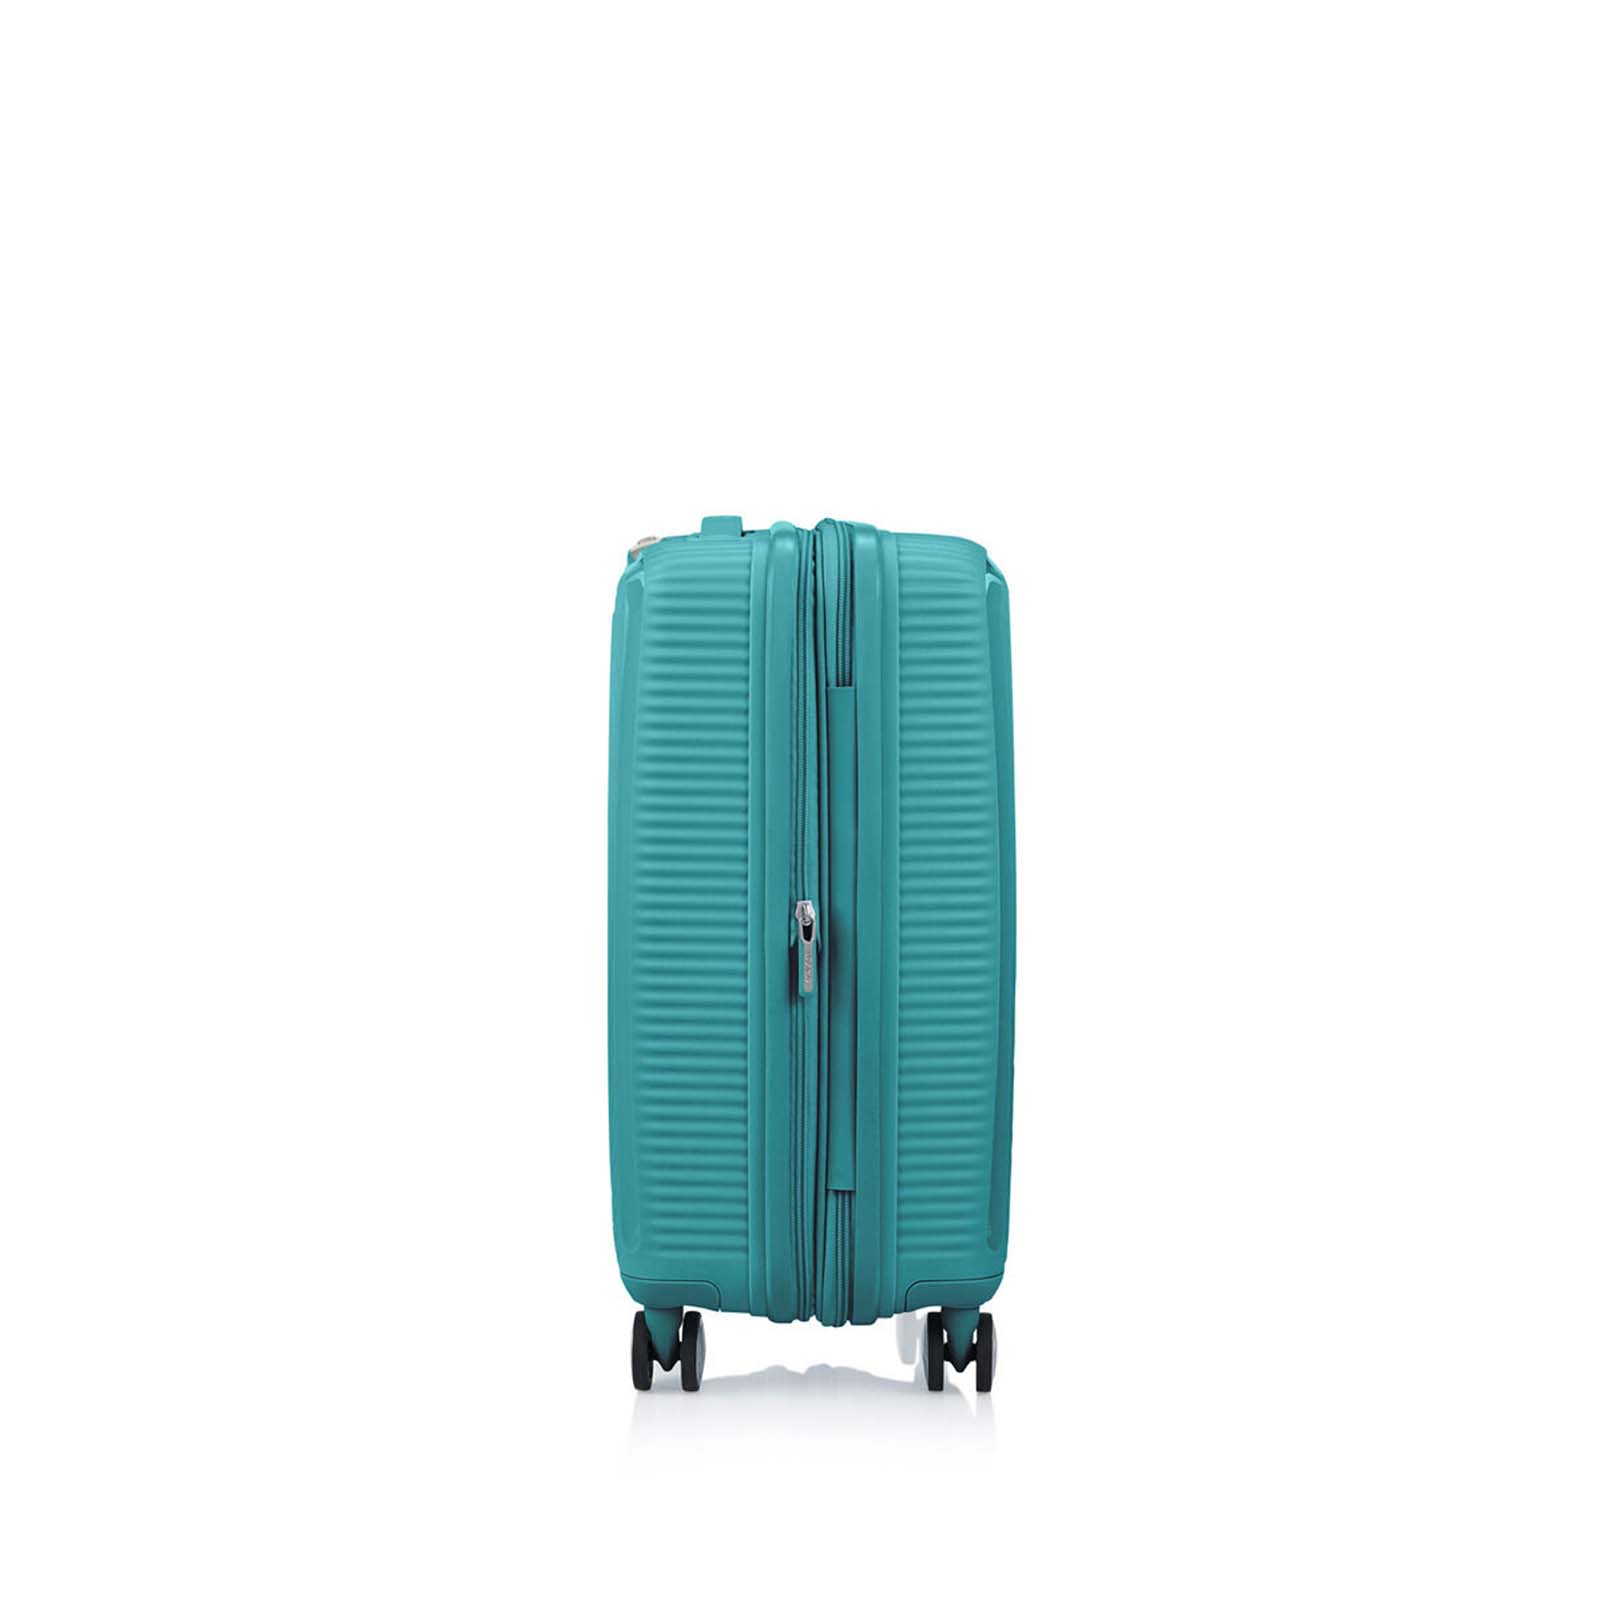 American-Tourister-Curio-2-55cm-Carry-On-Suitcase-Jade-Green-Side